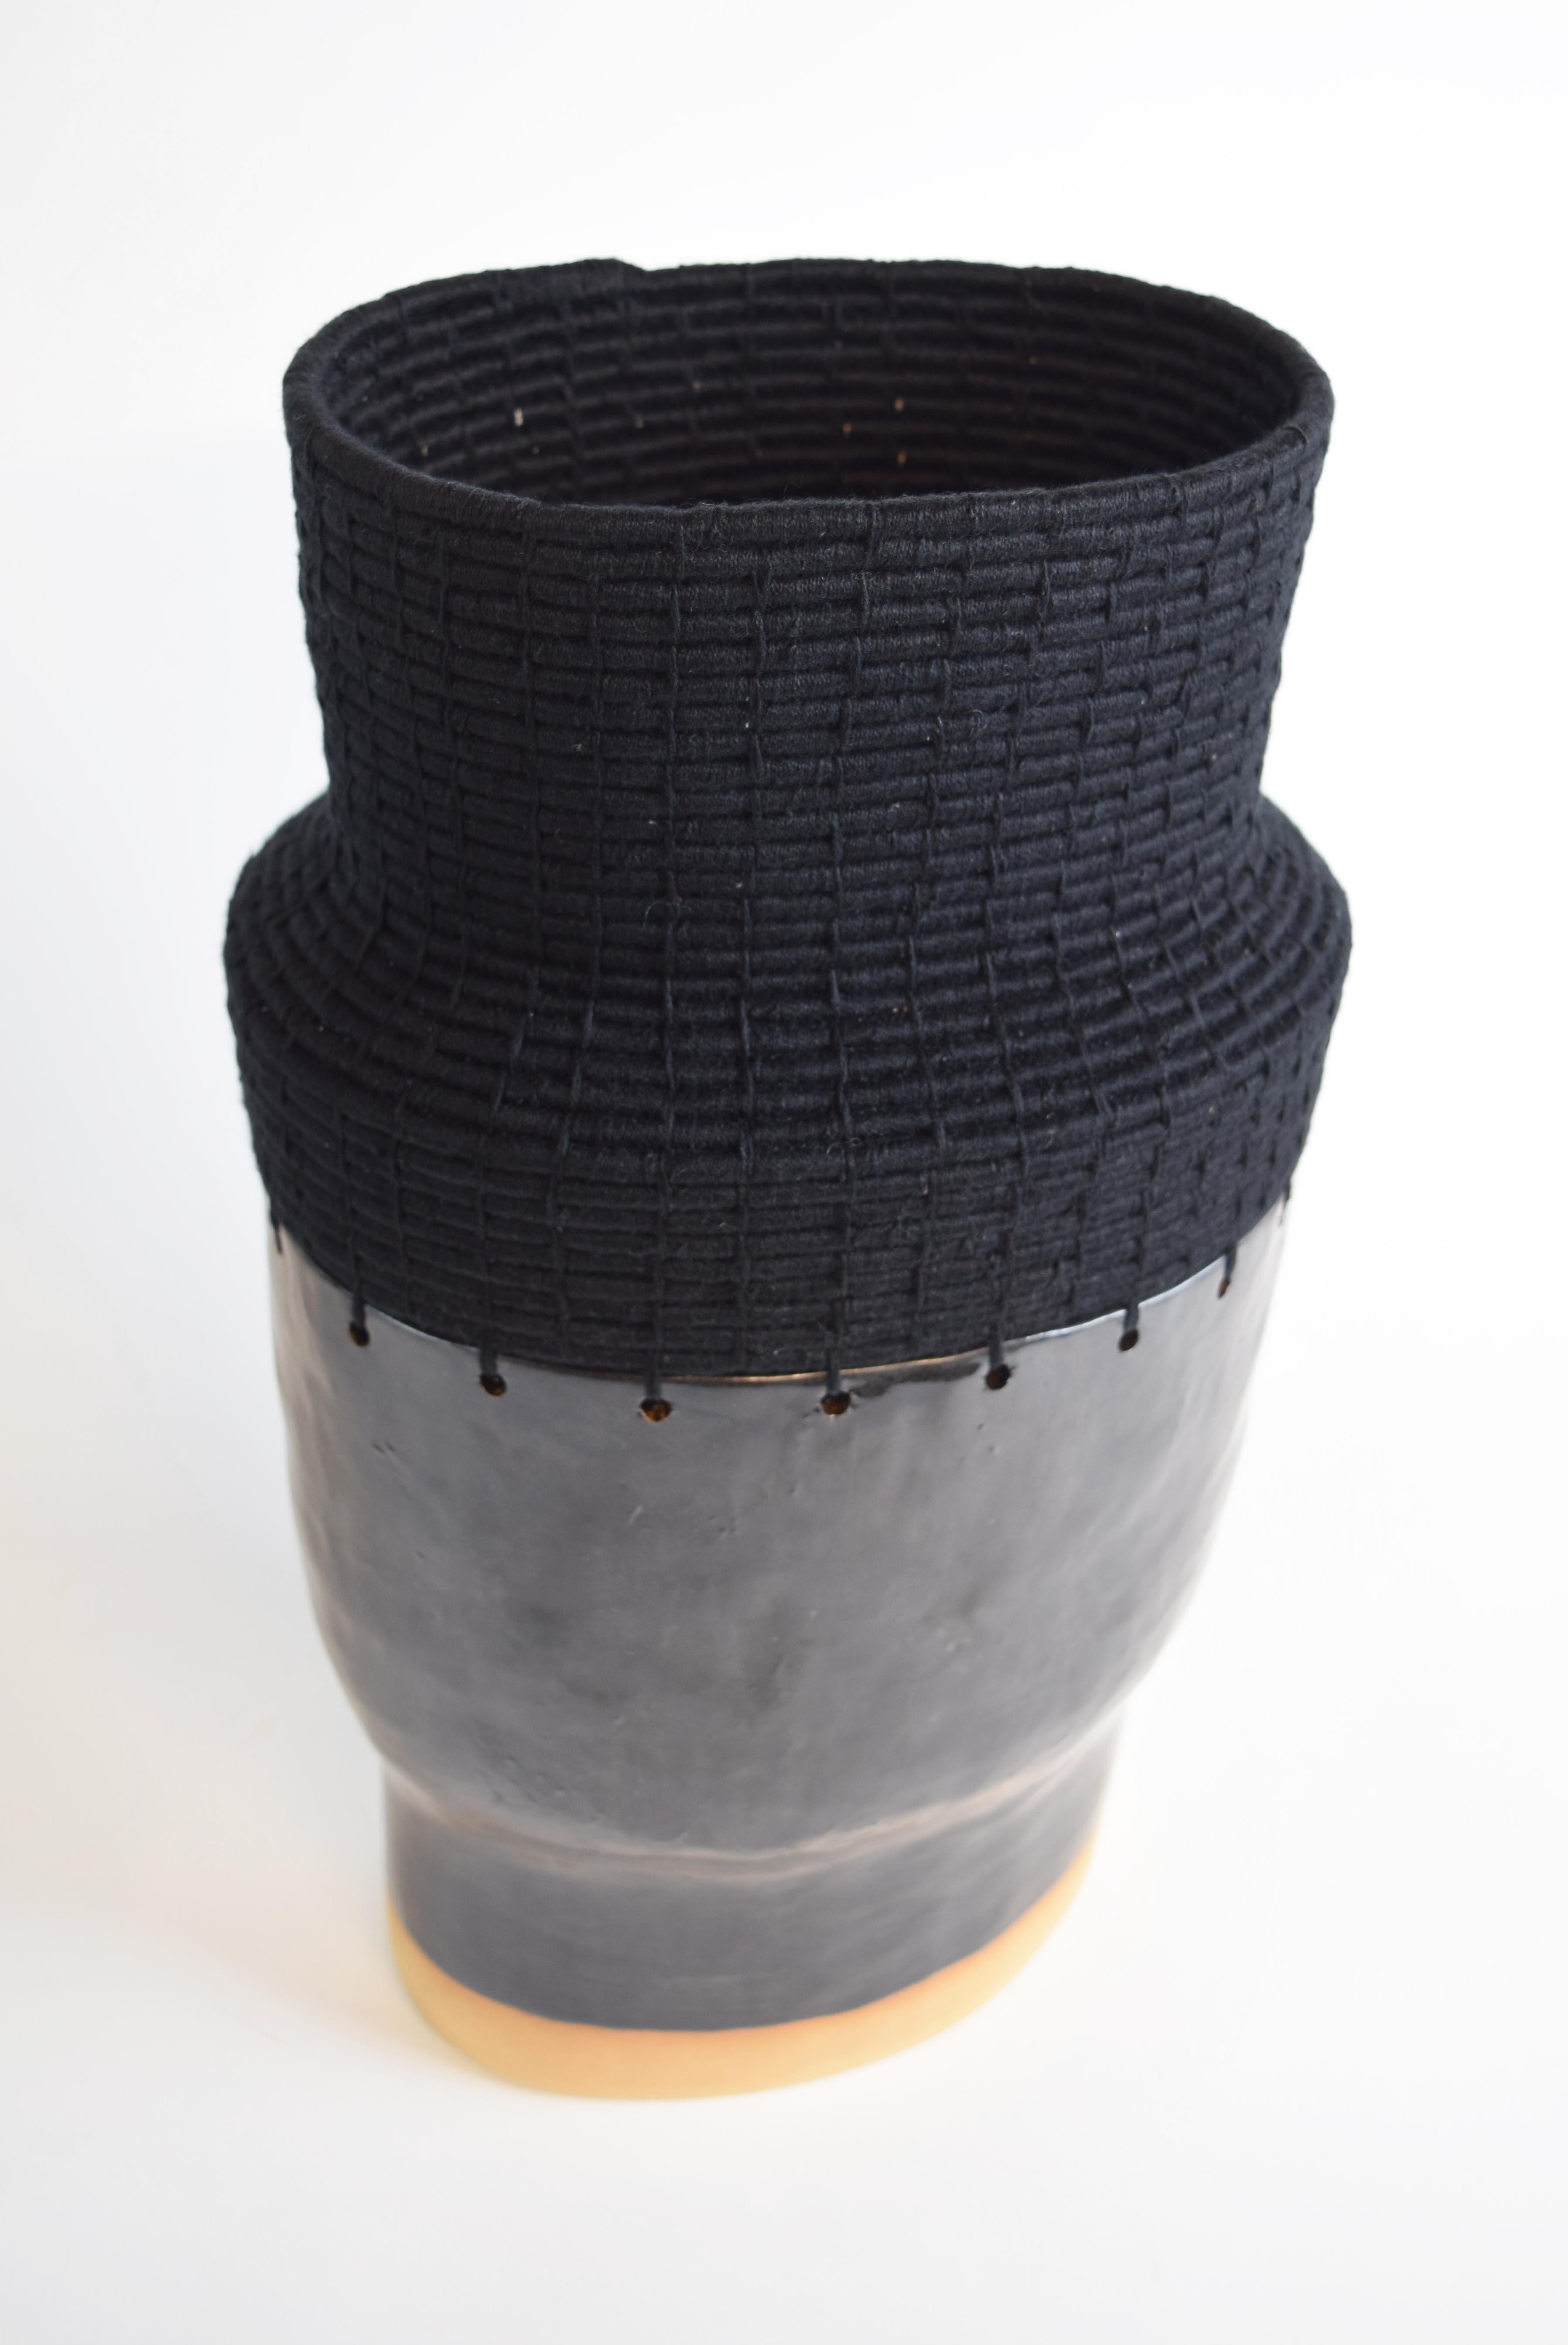 Hand formed stoneware base with black glaze. The top part is woven in black cotton.

16”H x 9”W

One of a kind collections with a limited number of pieces are released periodically throughout the year. Each piece is meticulously crafted by Karen